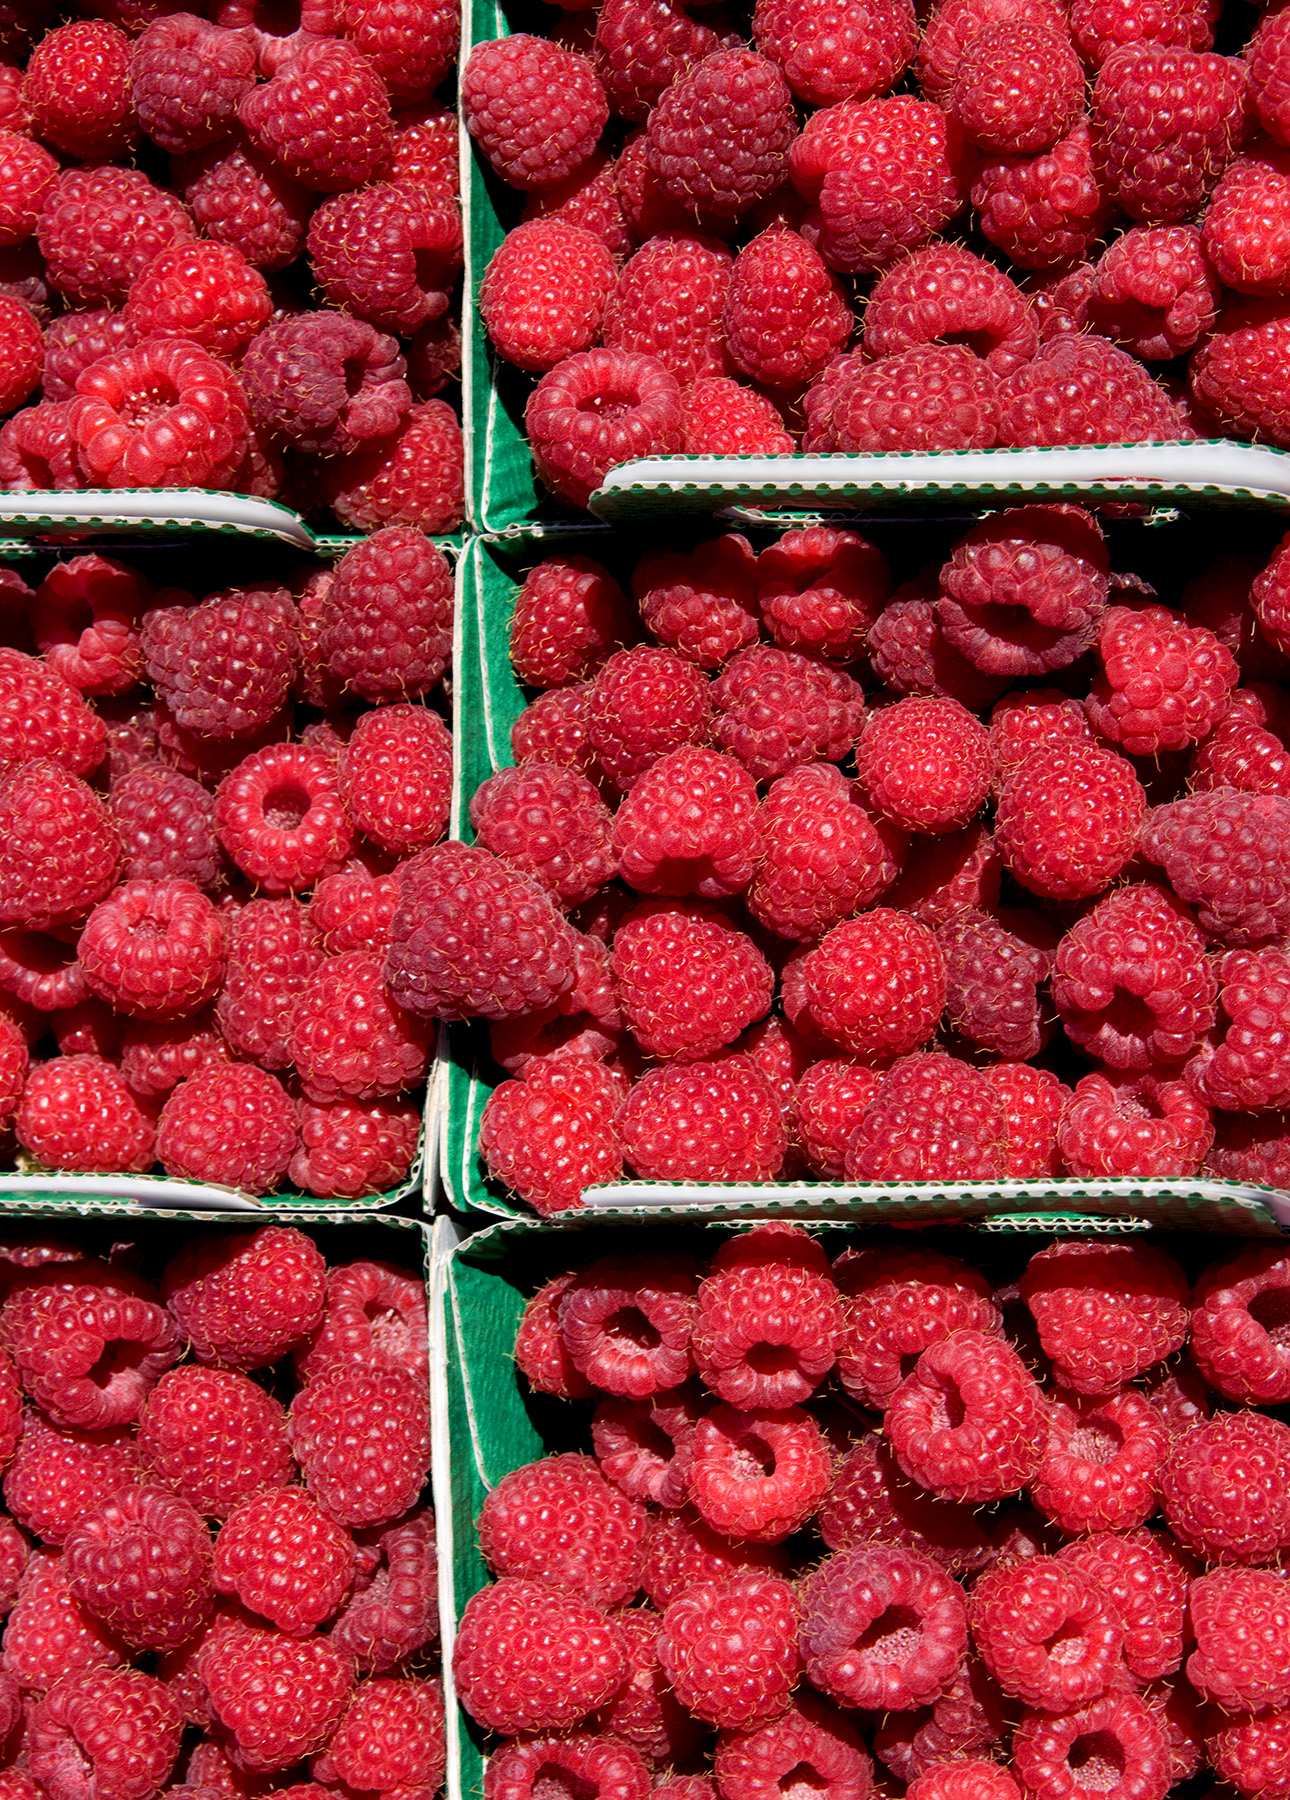 Baskets of fresh raspberries at the market // FoodNouveau.com